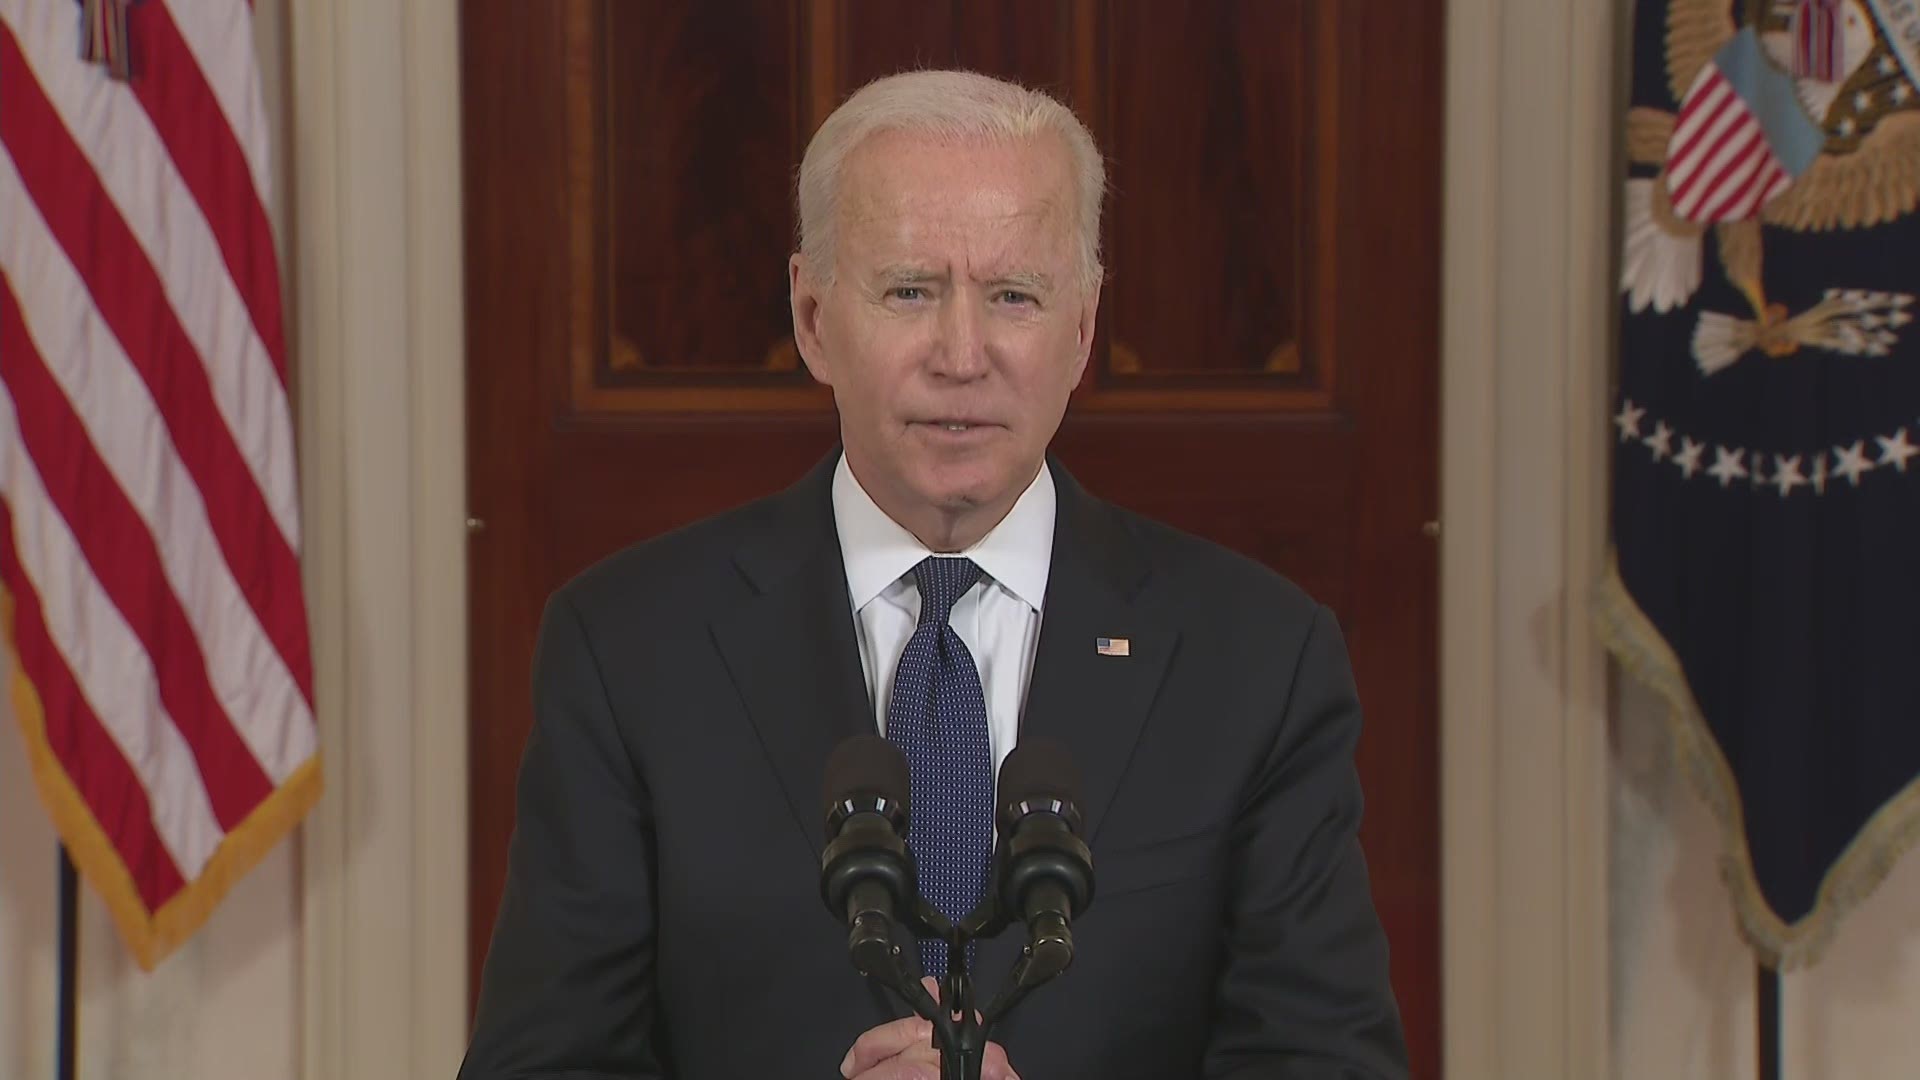 President Joe Biden spoke Thursday afternoon about the reported cease fire between Israel and Hamas.